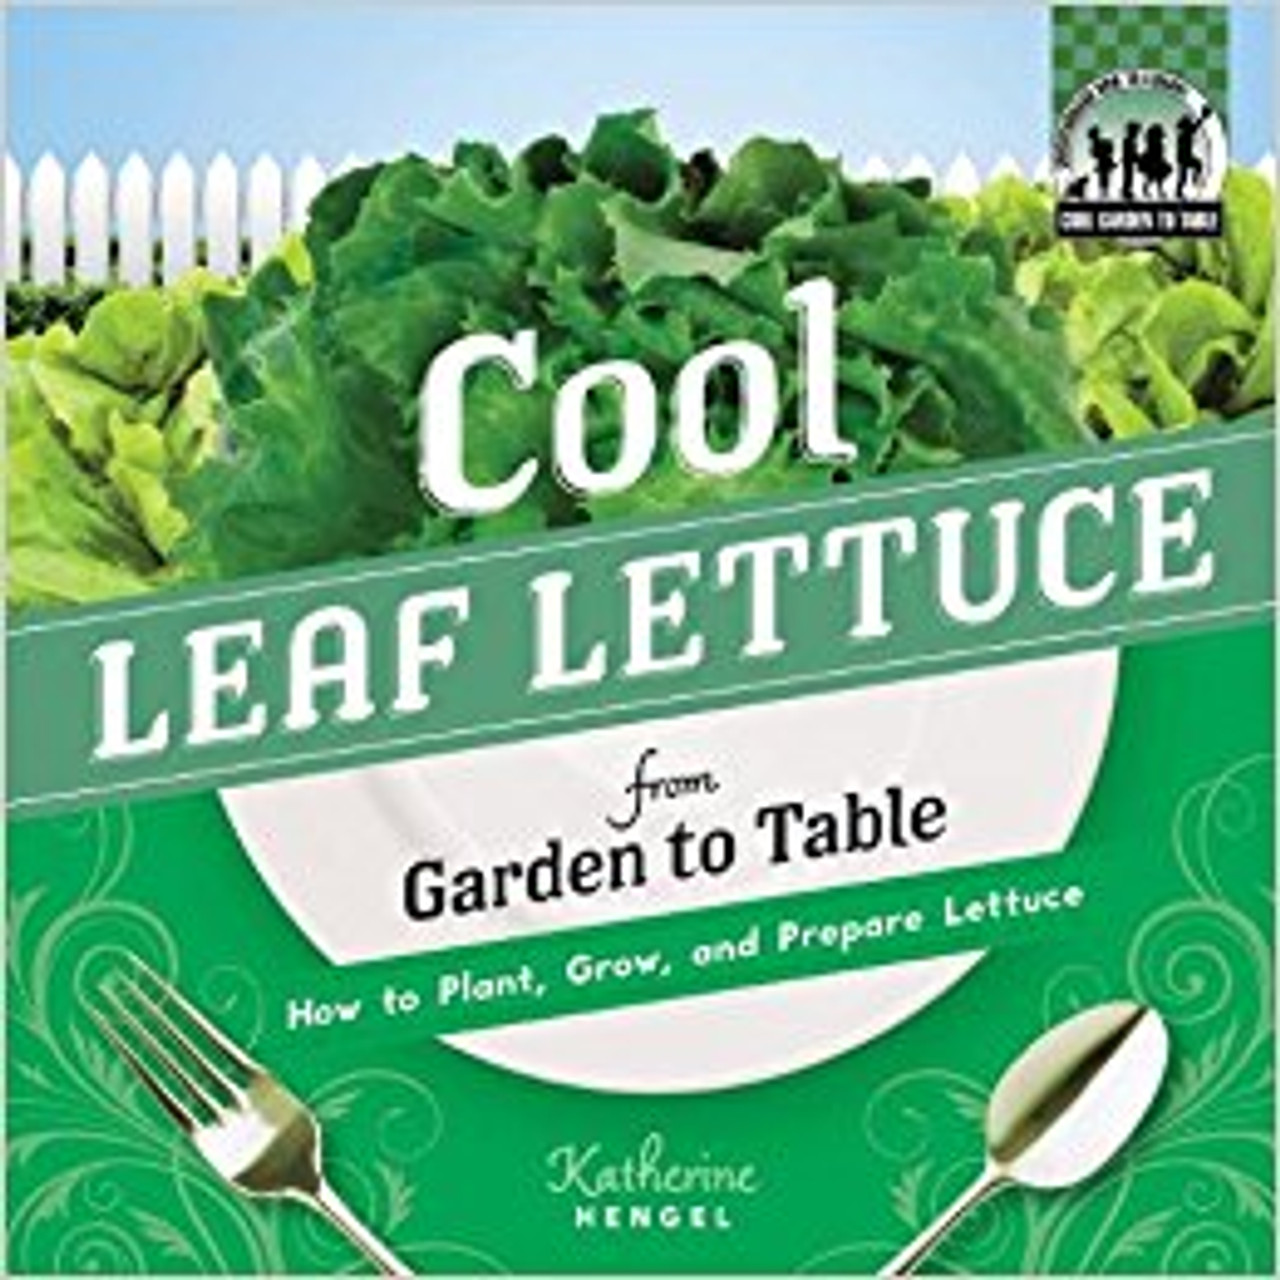 Cool Leaf Lettuce from Garden to Table: How to Plant, Grow, and Prepare Lettuce lb by Katherine Hengel